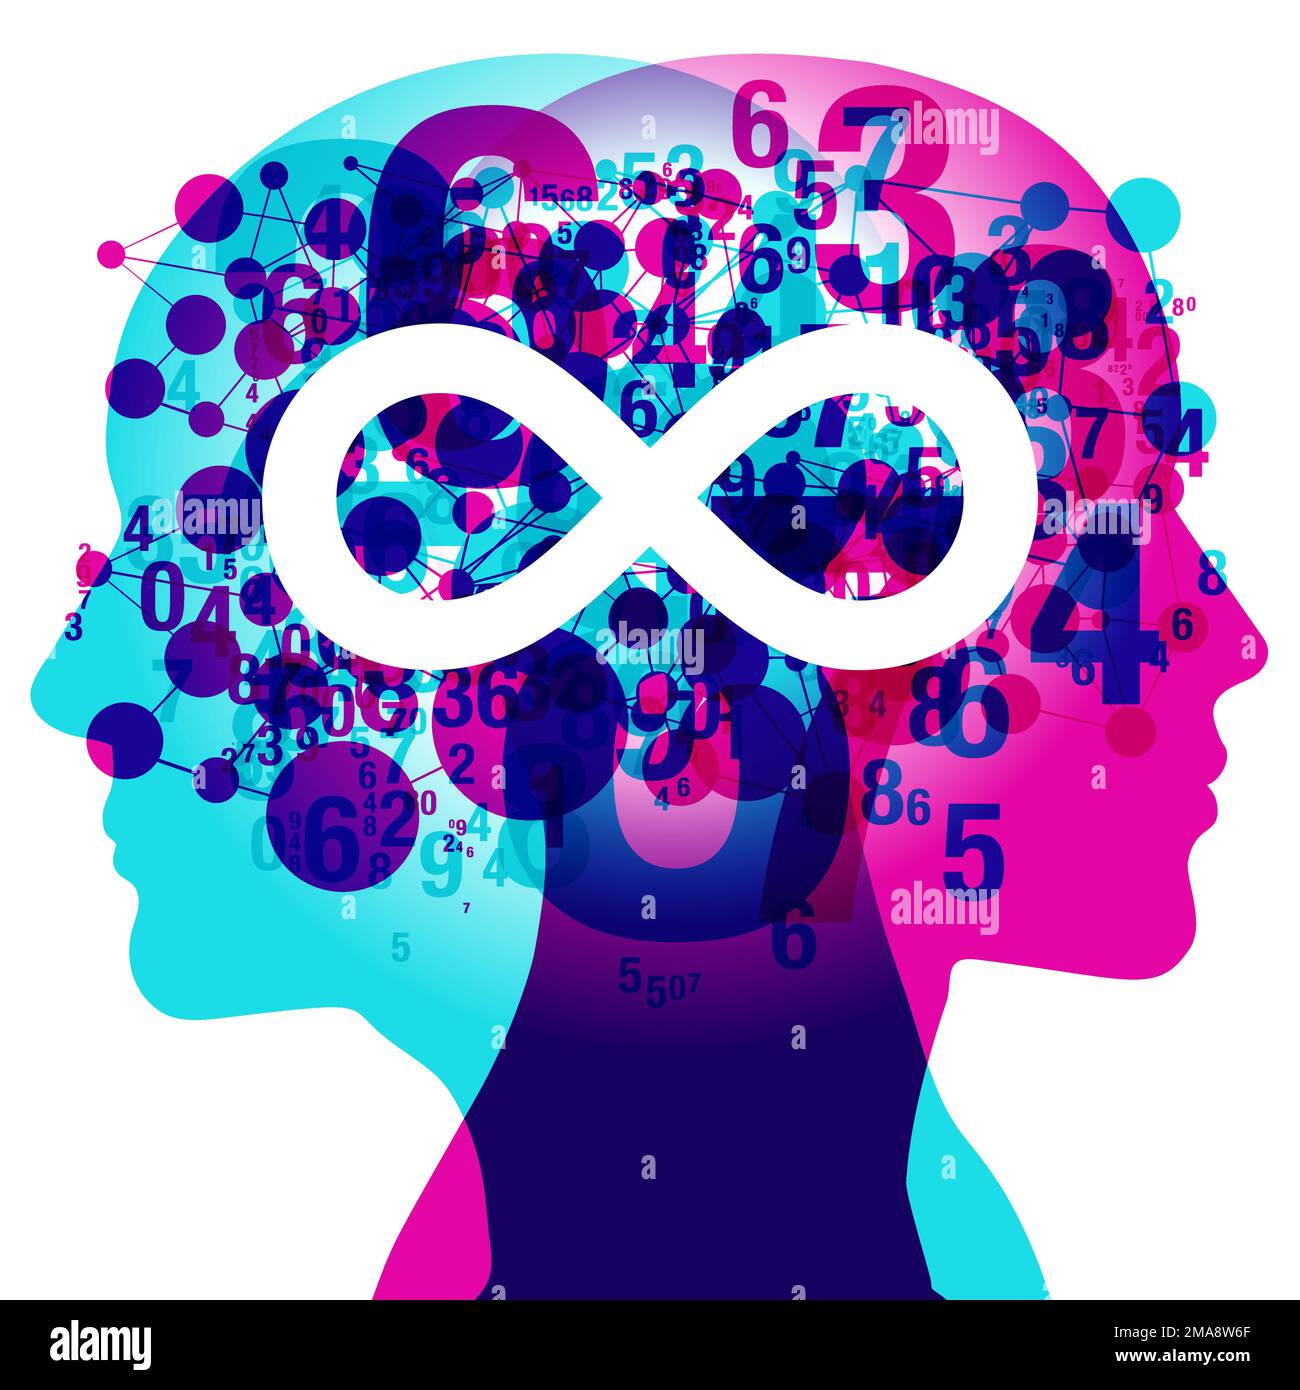 2 side figure silhouettes overlaid with semi-transparent numerals and connected shapes. Centrally placed is a large white “Infinity” symbol. Stock Vector